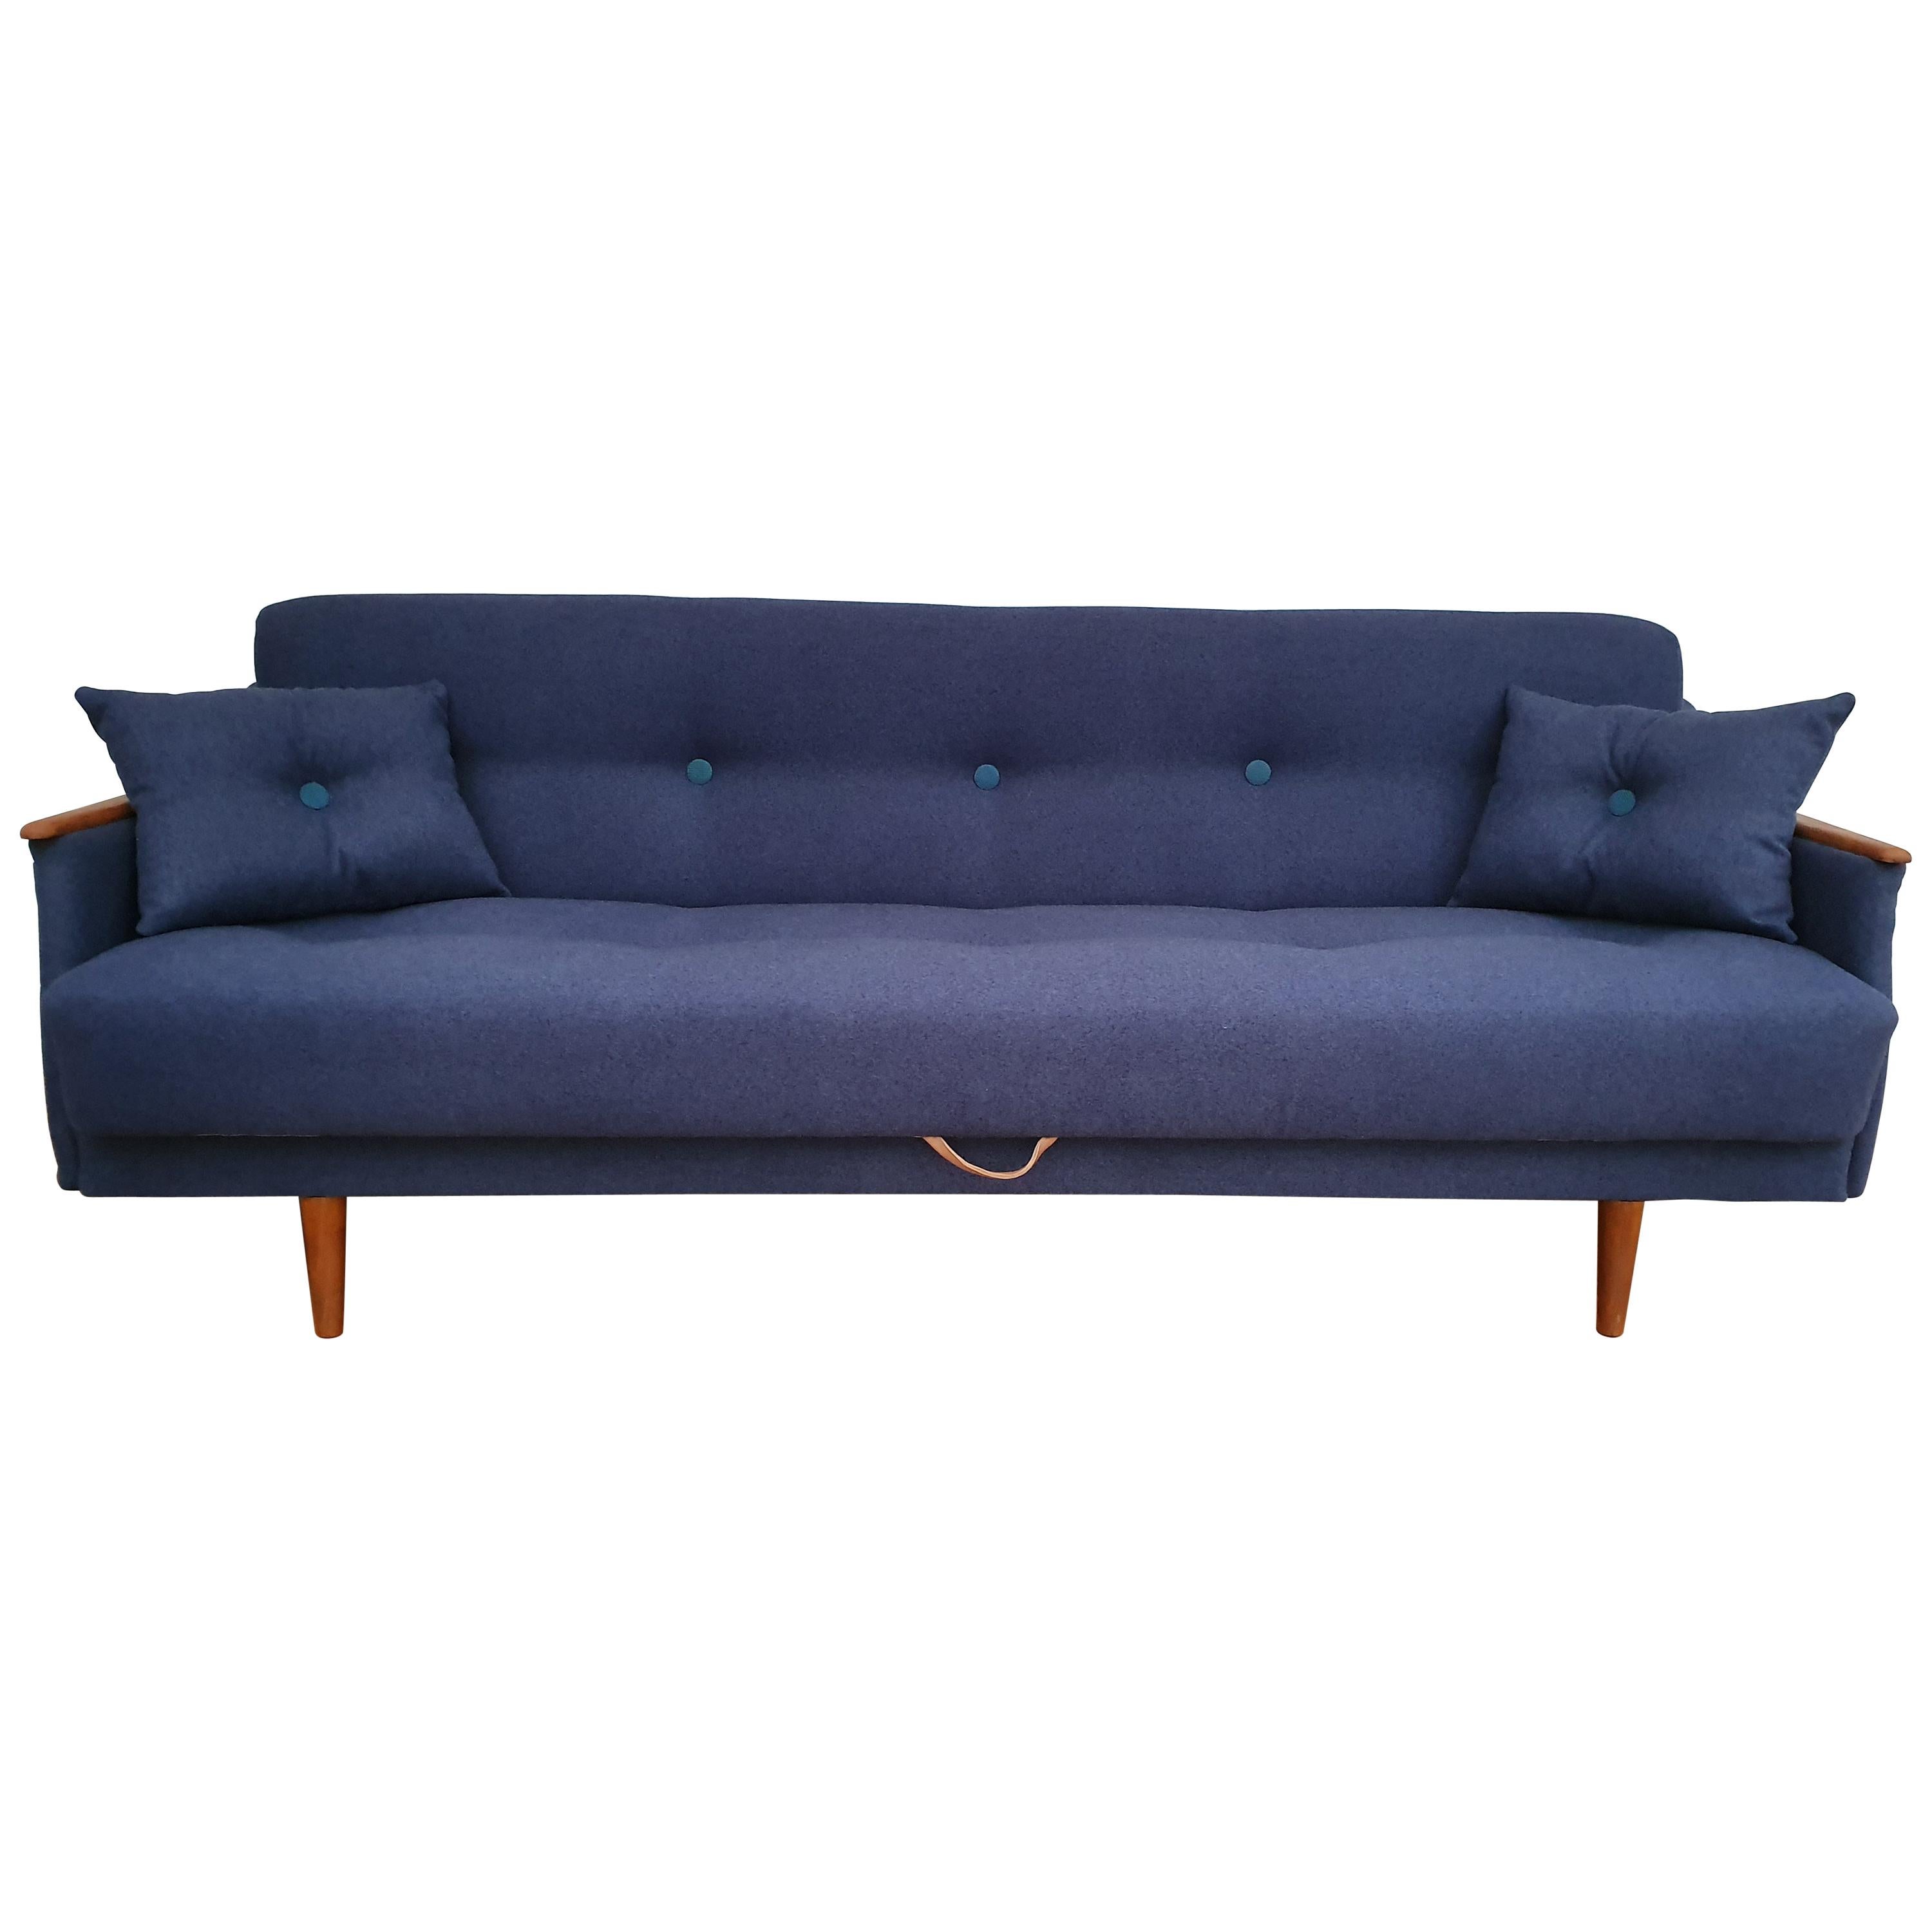 Danish Designed, 3 Persons Sofa Bed, 1960s, Completely Restored im Angebot